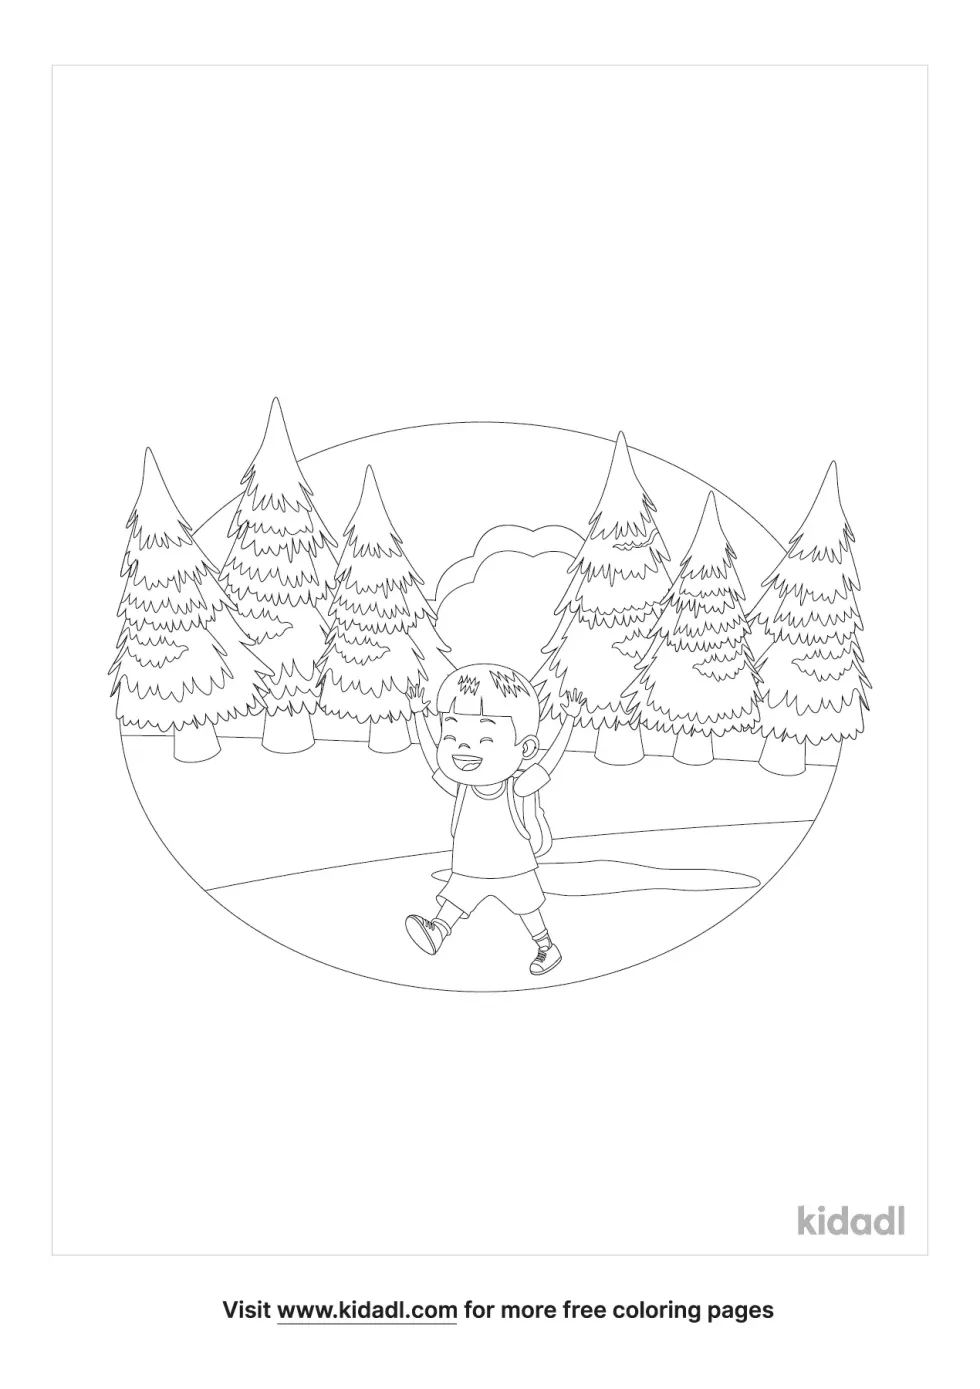 Boy In A Forest Coloring Page